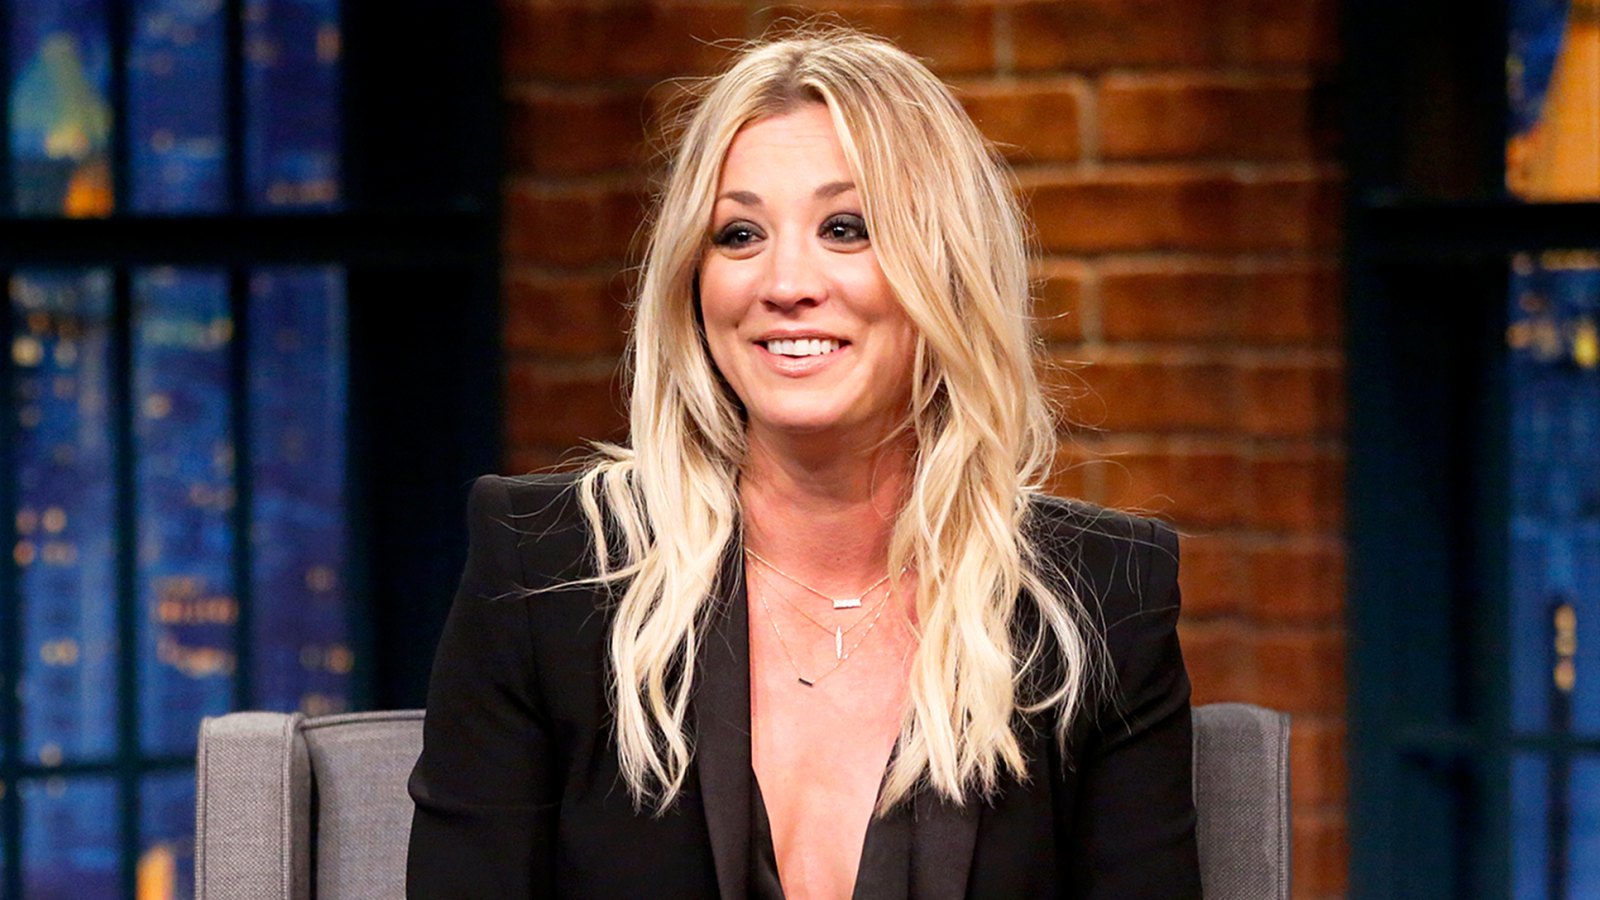 Kaley Cuoco during ‘Late Night with Seth Meyers‘